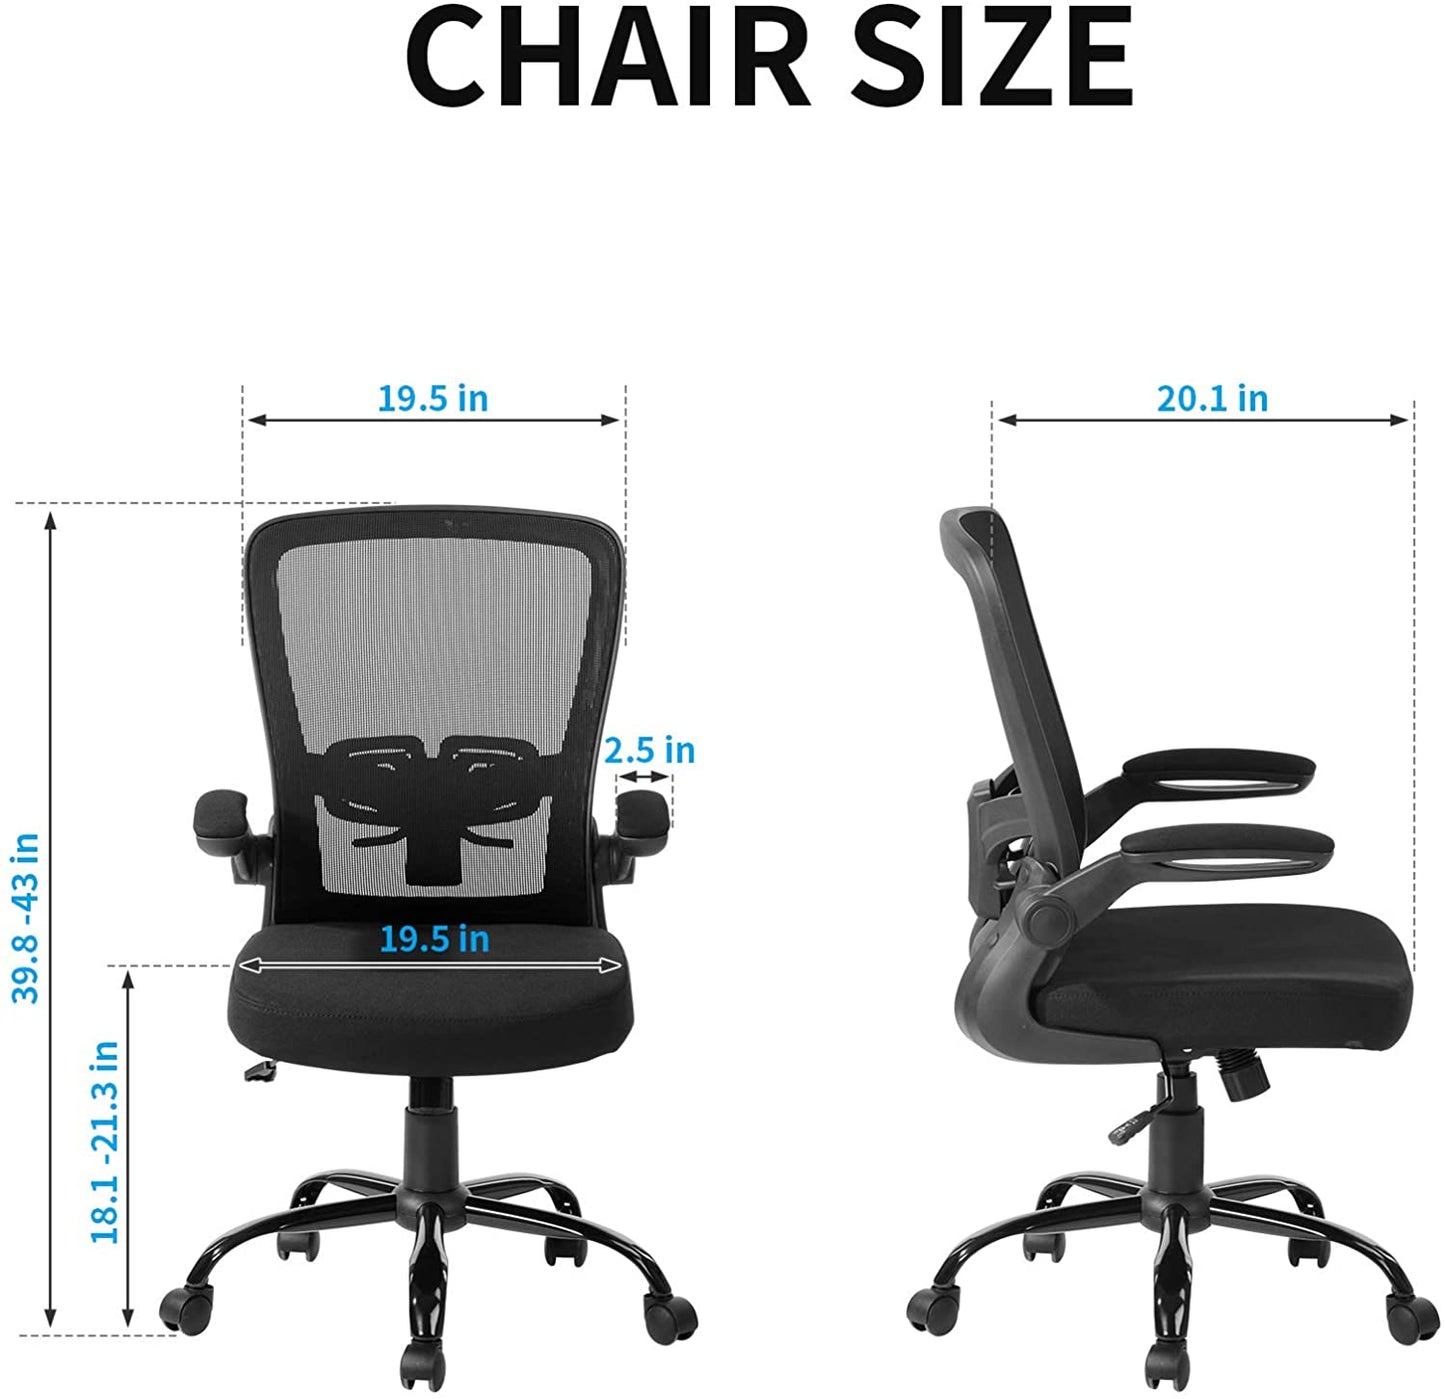 UNICOO - Mid Back Mesh Computer Chair, Office Task Desk Chair, Swivel Home Comfort Chairs with Padded Flip-up Armrests and Adjustable Lumbar Support (RY-N-01-Black)